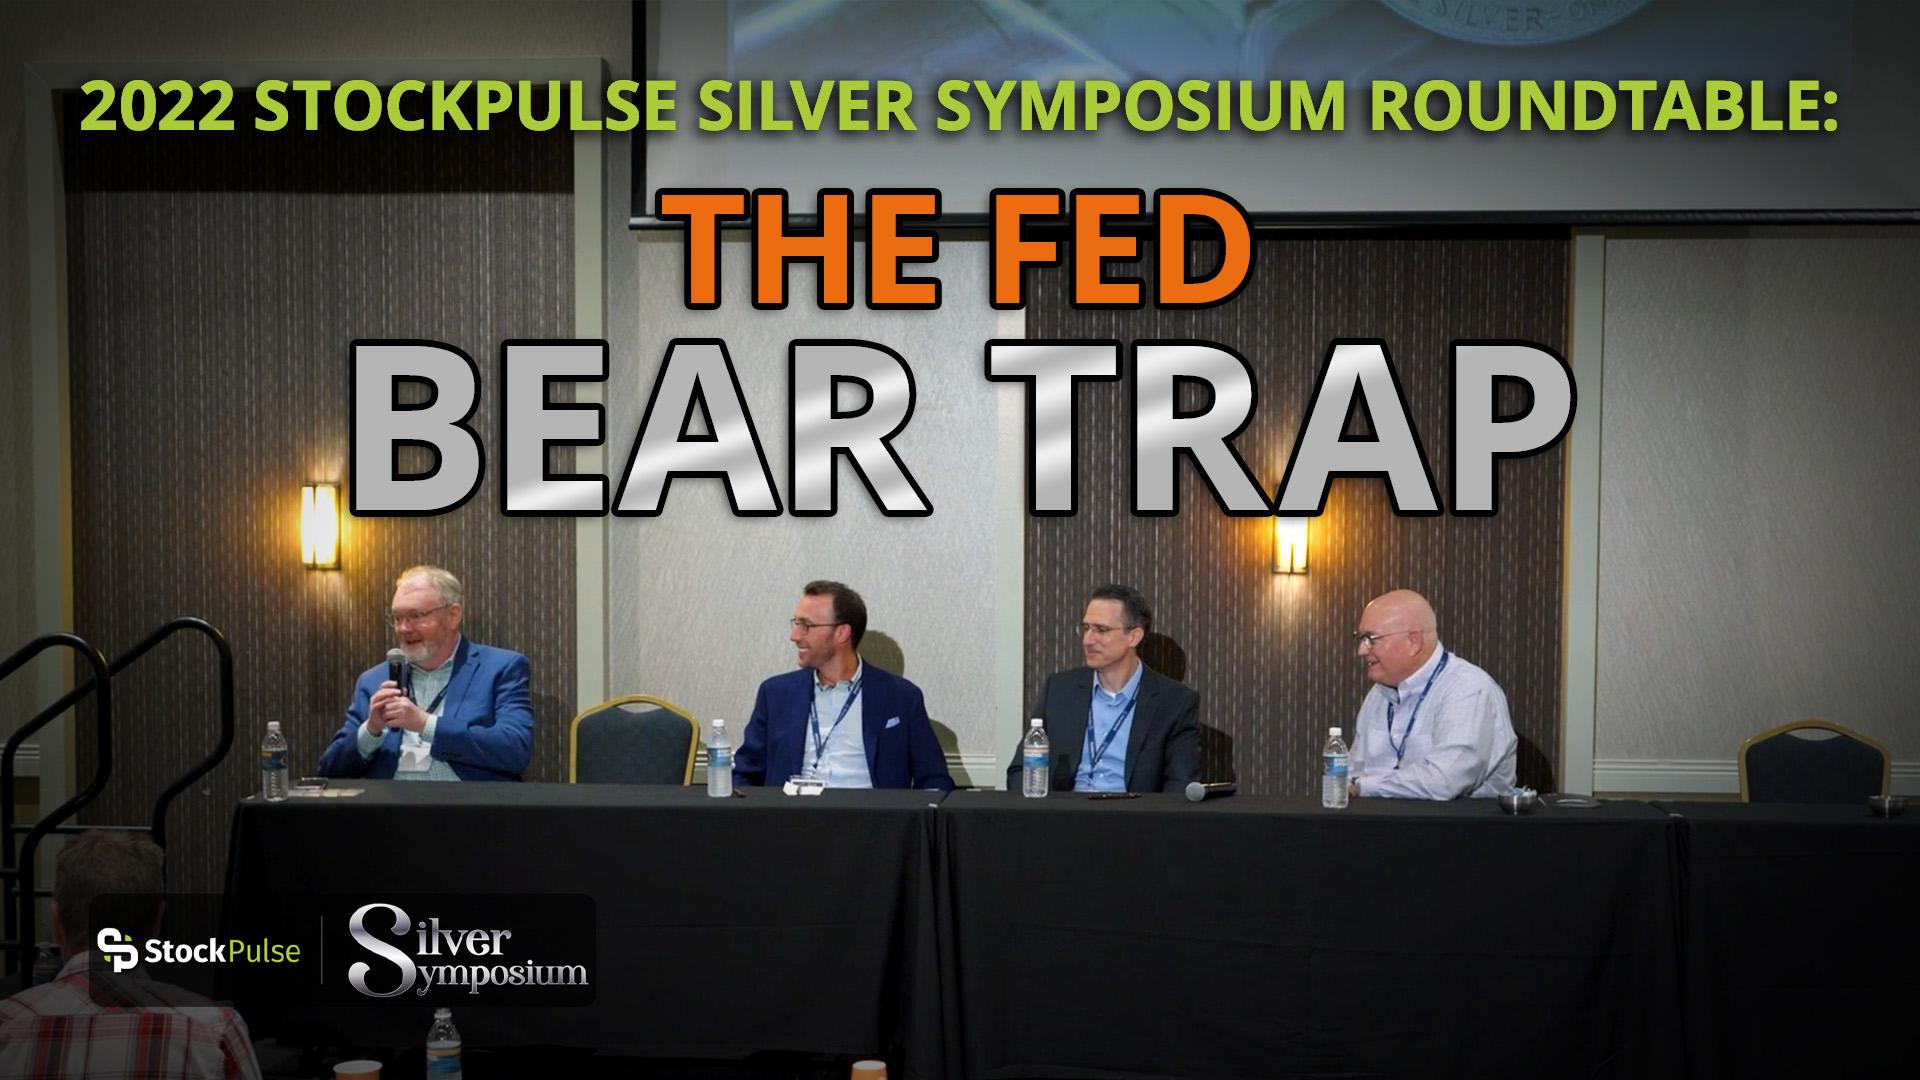 Roundtable Discussion – The Fed Bear Trap